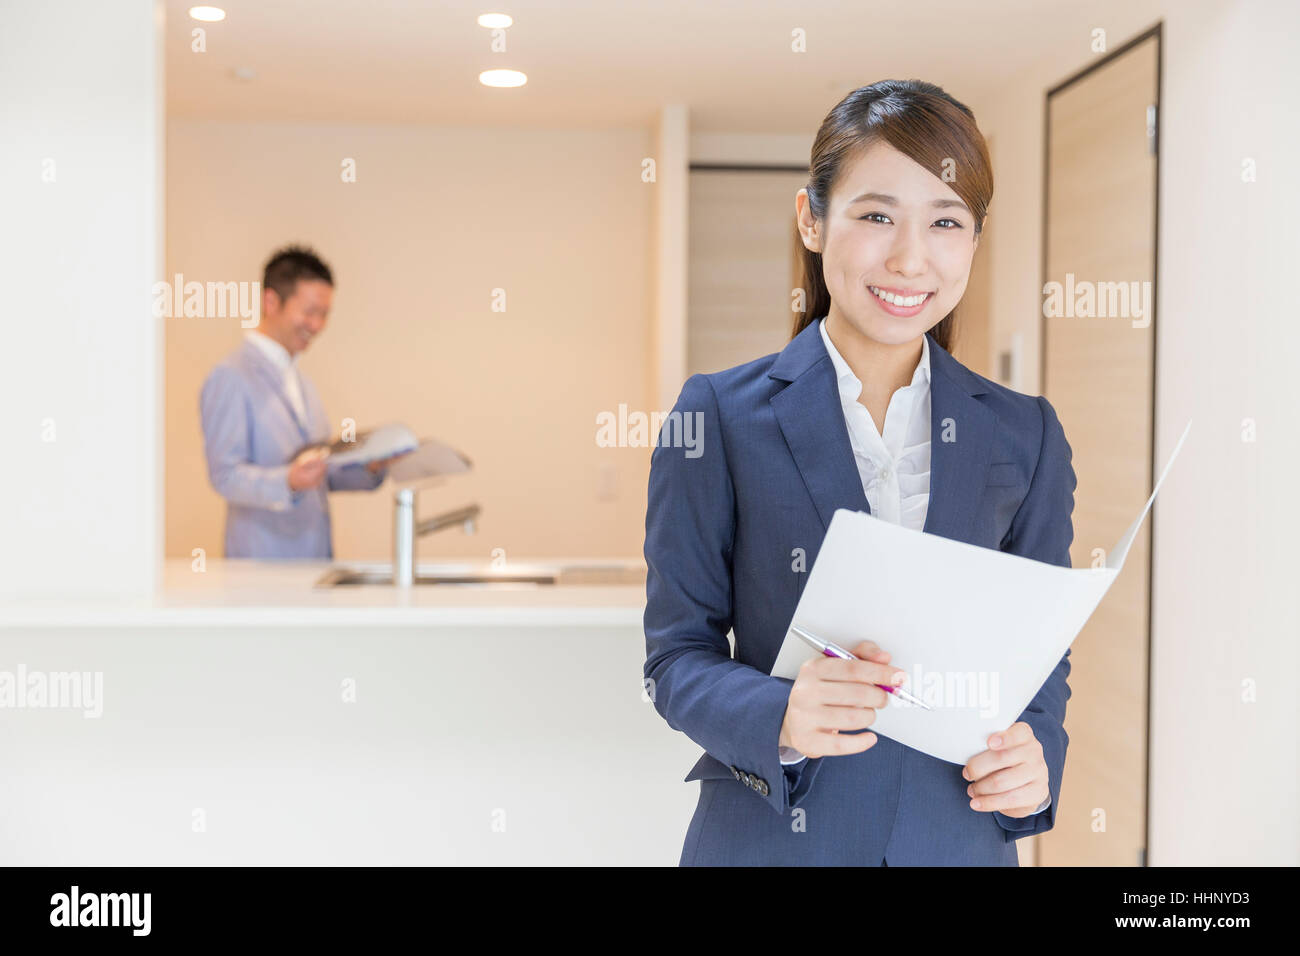 Woman Smiling to the Camera with Floor Plan Stock Photo